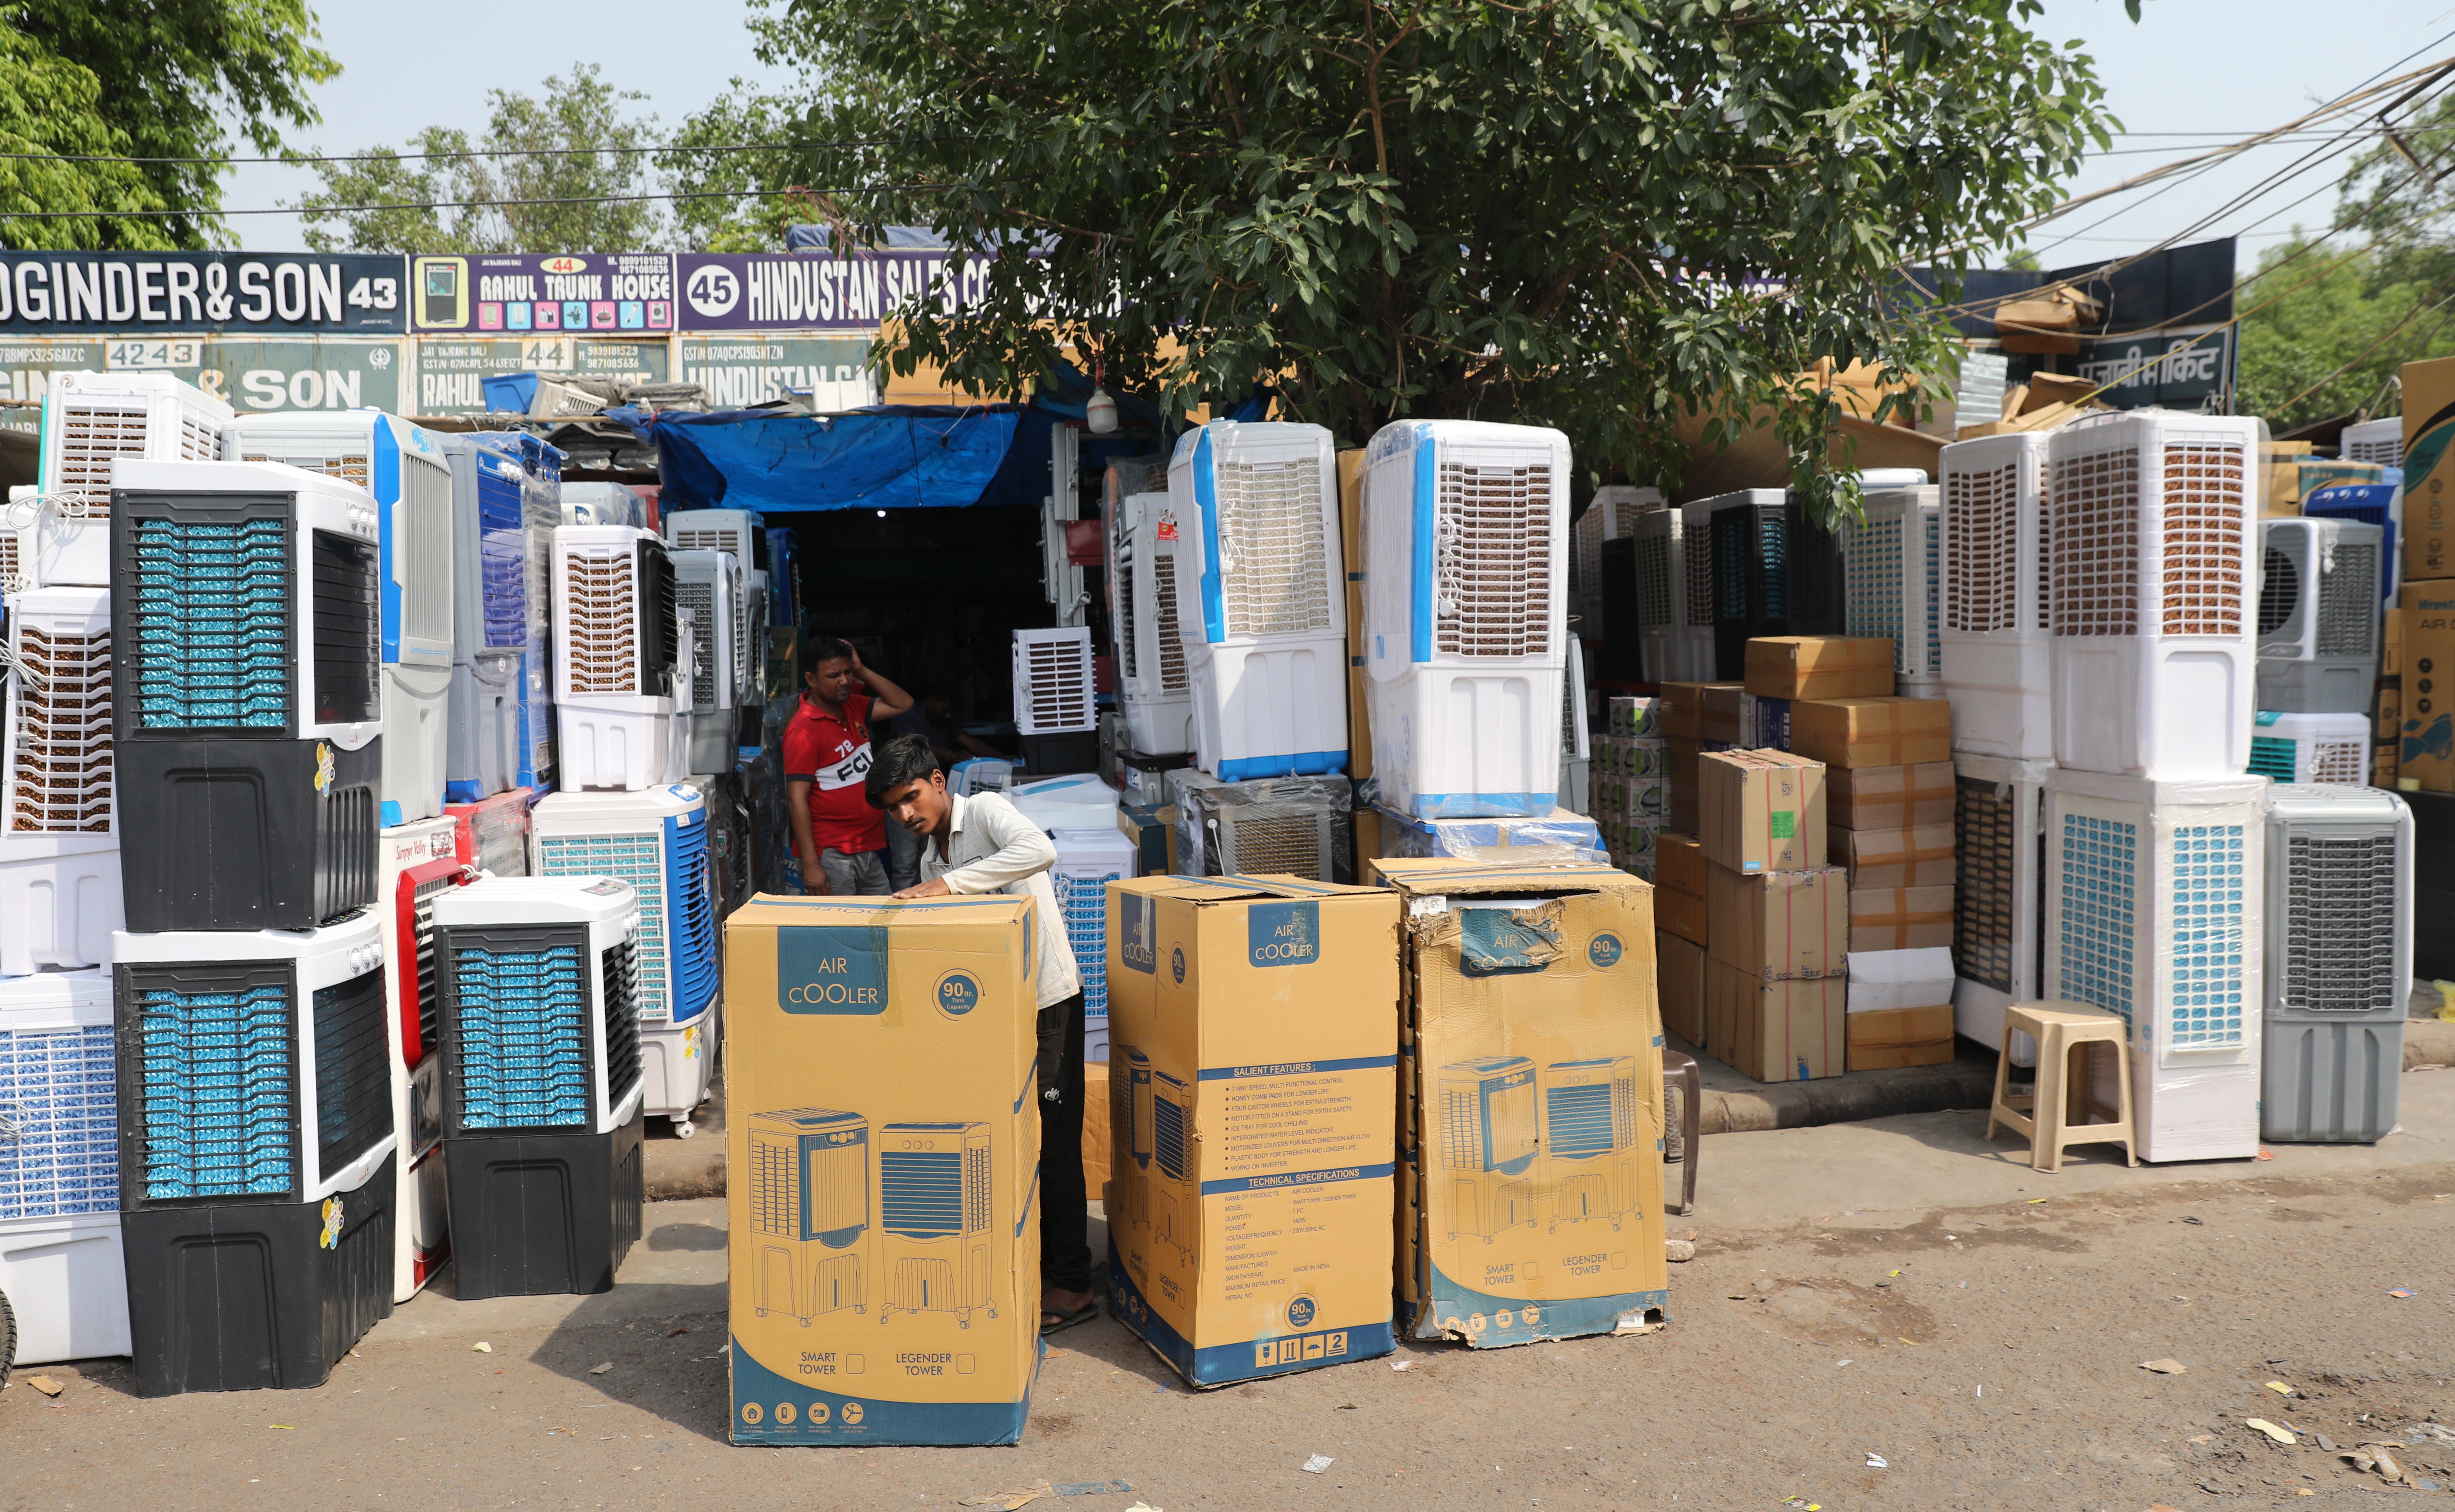 An Indian worker displays air coolers for sale as the temperature rises in New Delhi, 28 April 2022